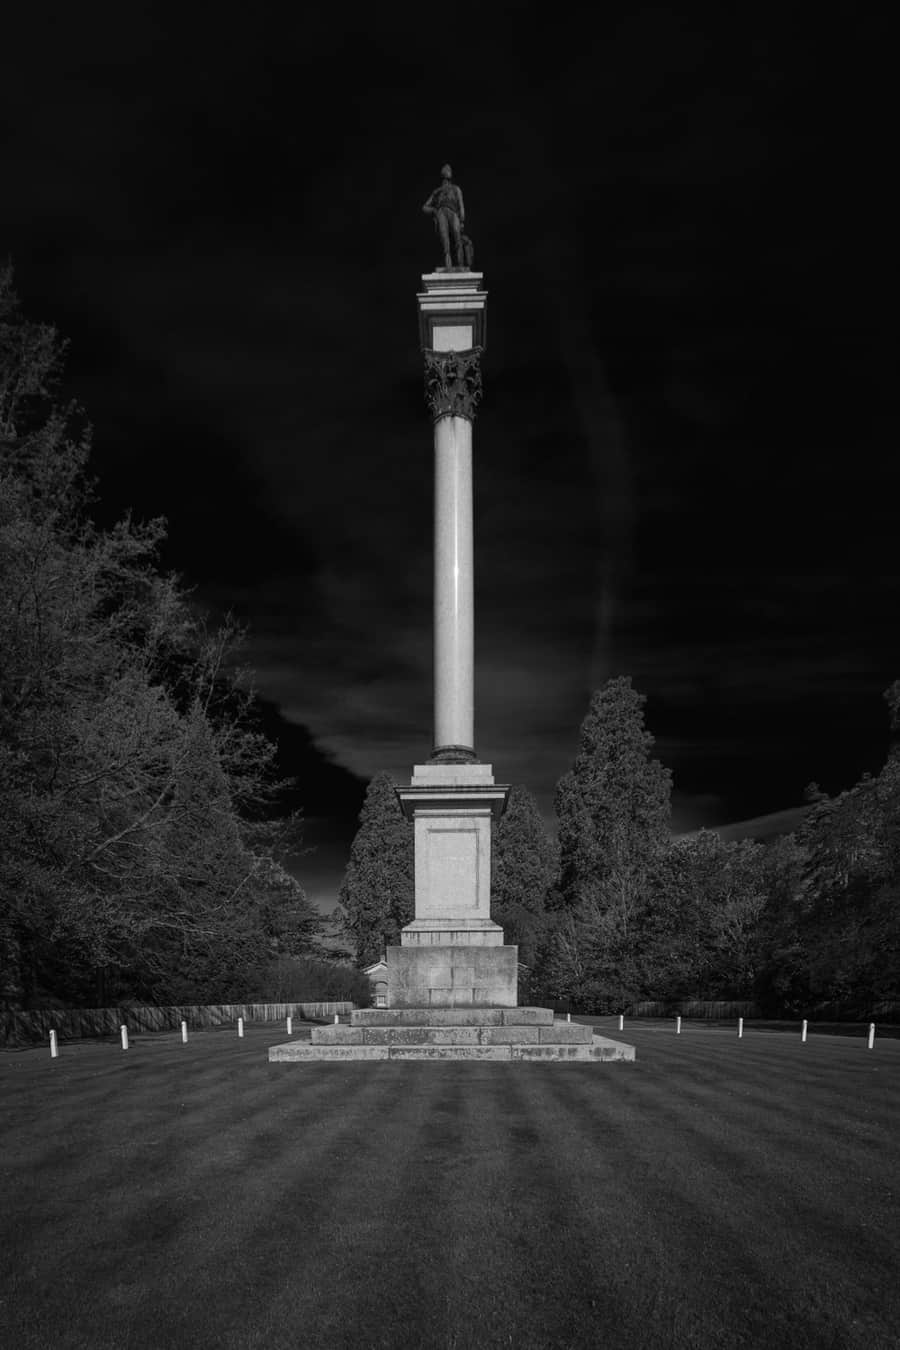  Wellington Memorial - black and white architectural photographers work in Hampshire by Rick McEvoy 